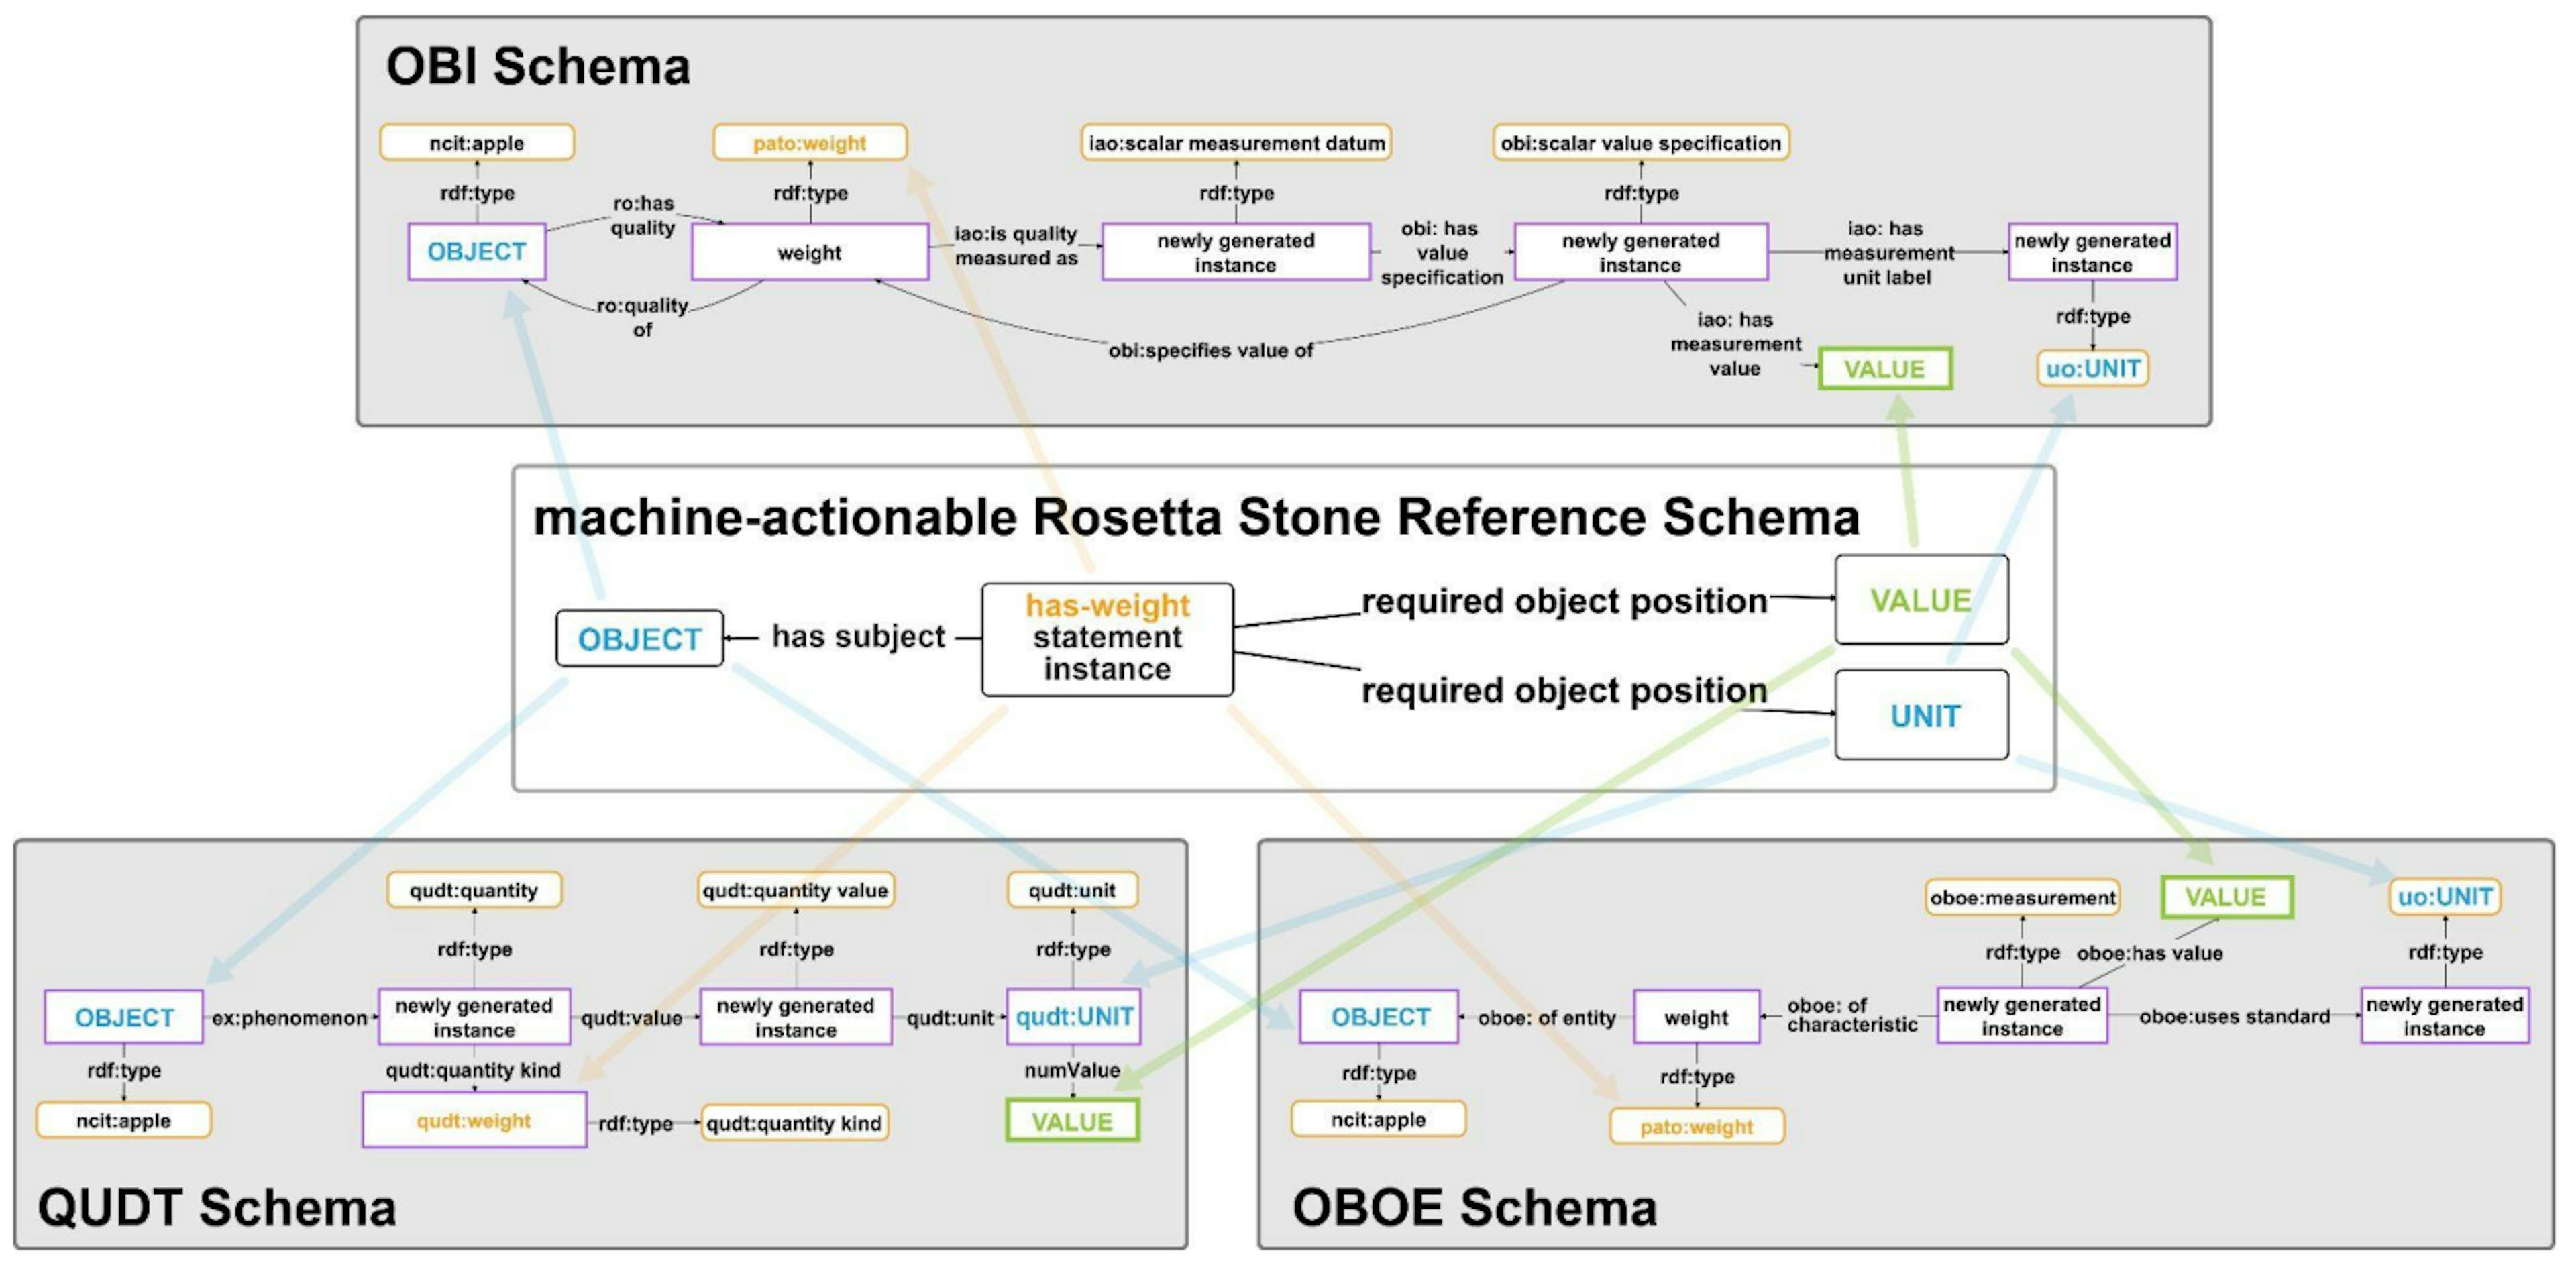 Figure 8: Schema crosswalks from the Rosetta Stone reference schema for a weight measurement statement to threeother schemata. Middle: The Rosetta Stone reference schema for a weight measurement statement. Top: The OBI schema.